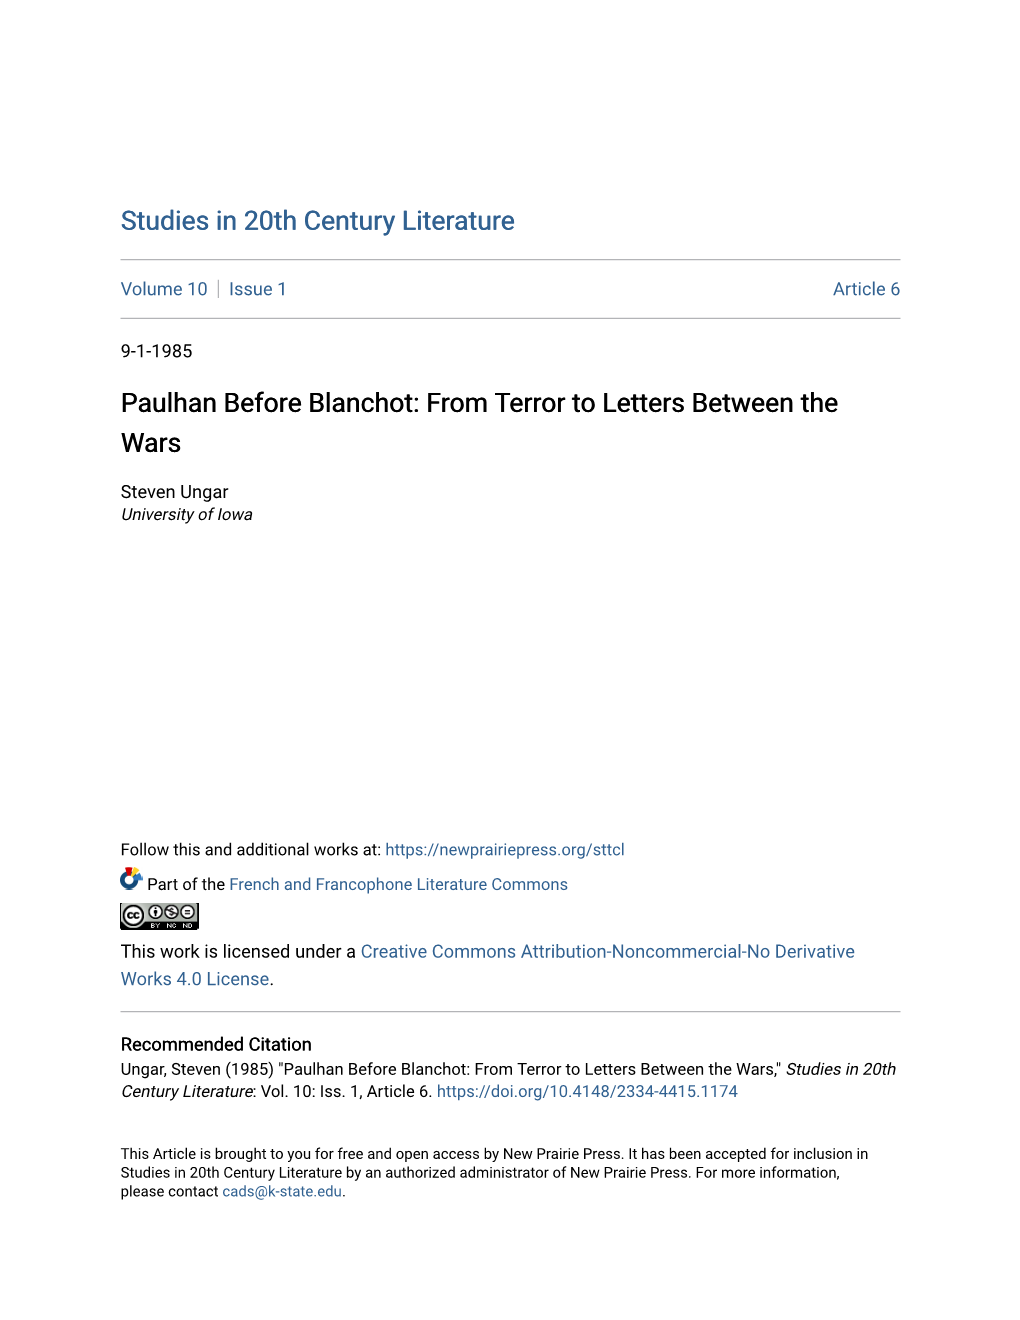 Paulhan Before Blanchot: from Terror to Letters Between the Wars